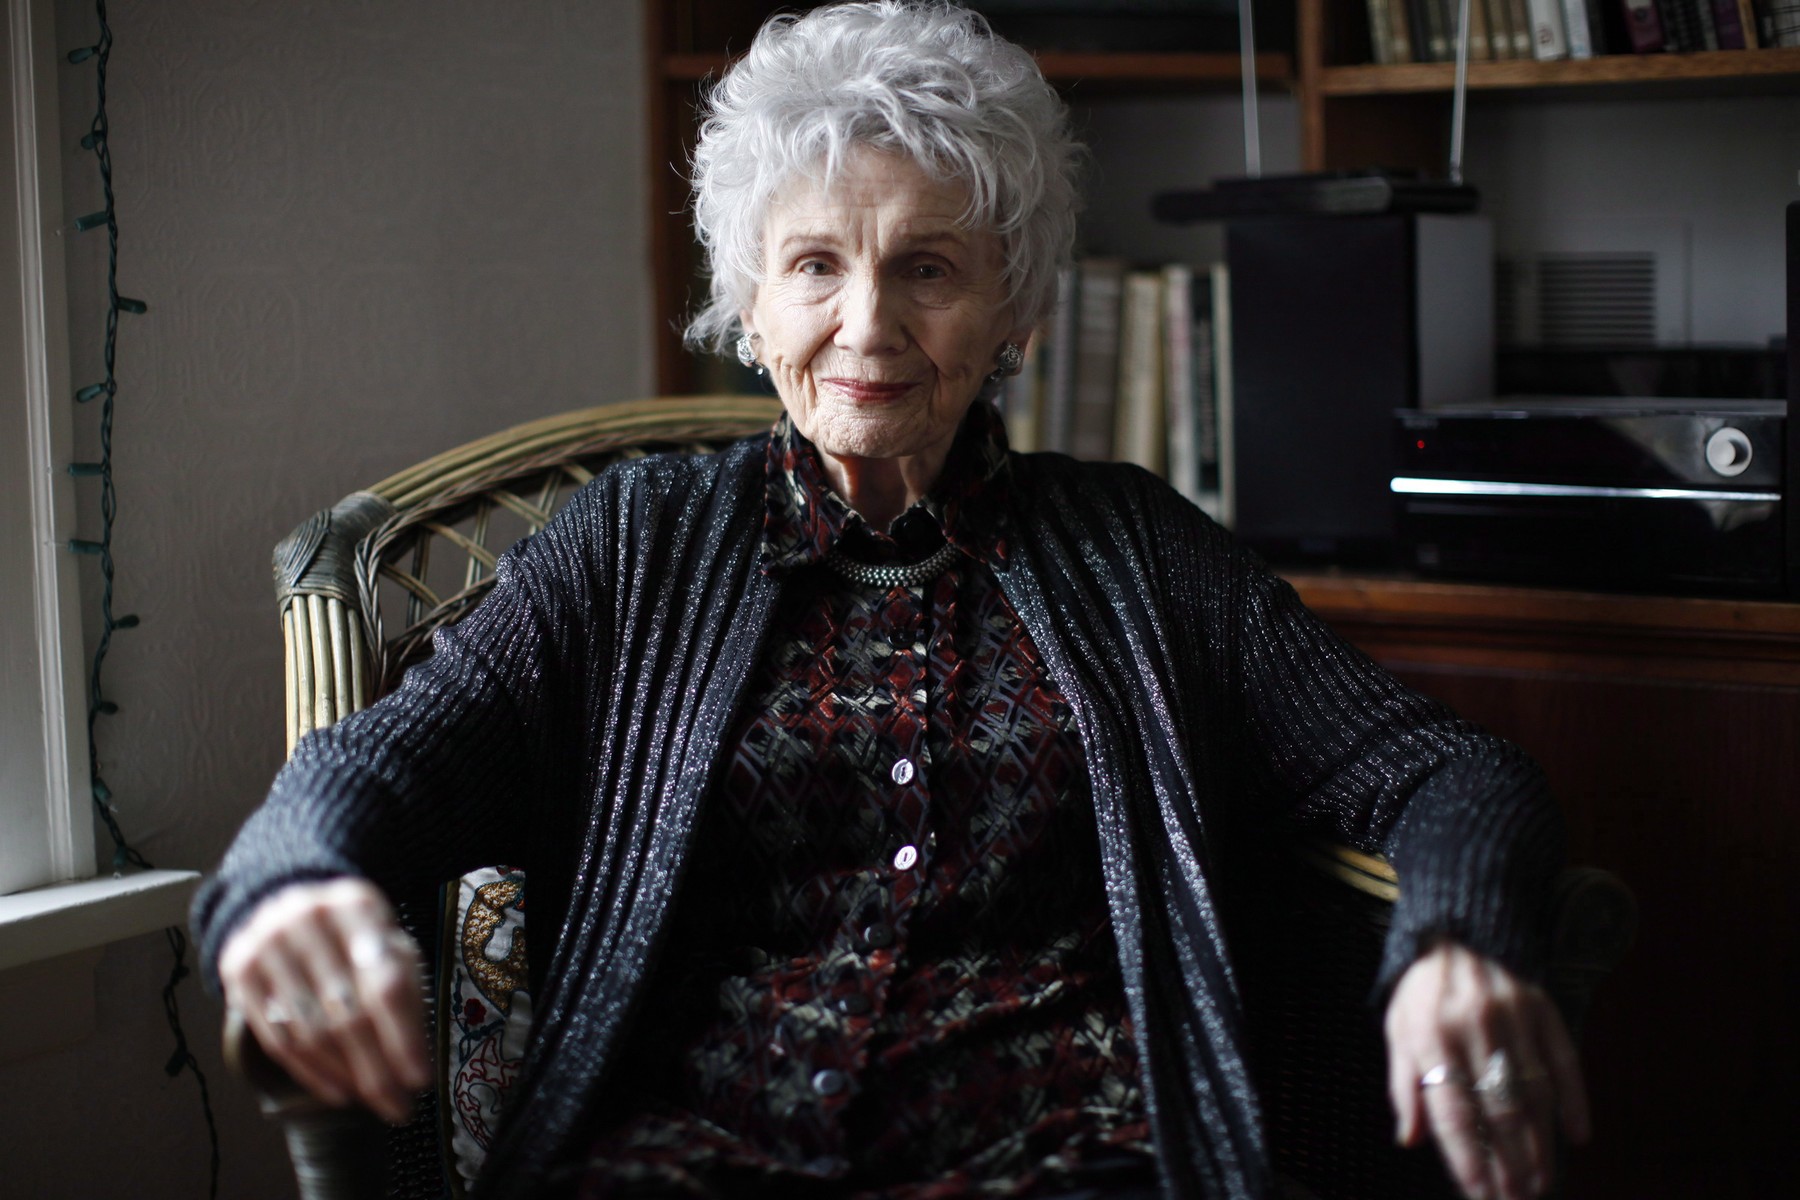 Canadian author Alice Munro is photographed at her daughter Sheila's home during an interview in Victoria, B.C. Tuesday December 10, 2013. Alice's daughter Jenny received the Nobel prize in Literature on her mother's behalf during a ceremony in Stockholm, Sweden.,Image: 179462416, License: Rights-managed, Restrictions: World rights excluding North America, Model Release: no, Credit line: Chad Hipolito / PA Images / Profimedia